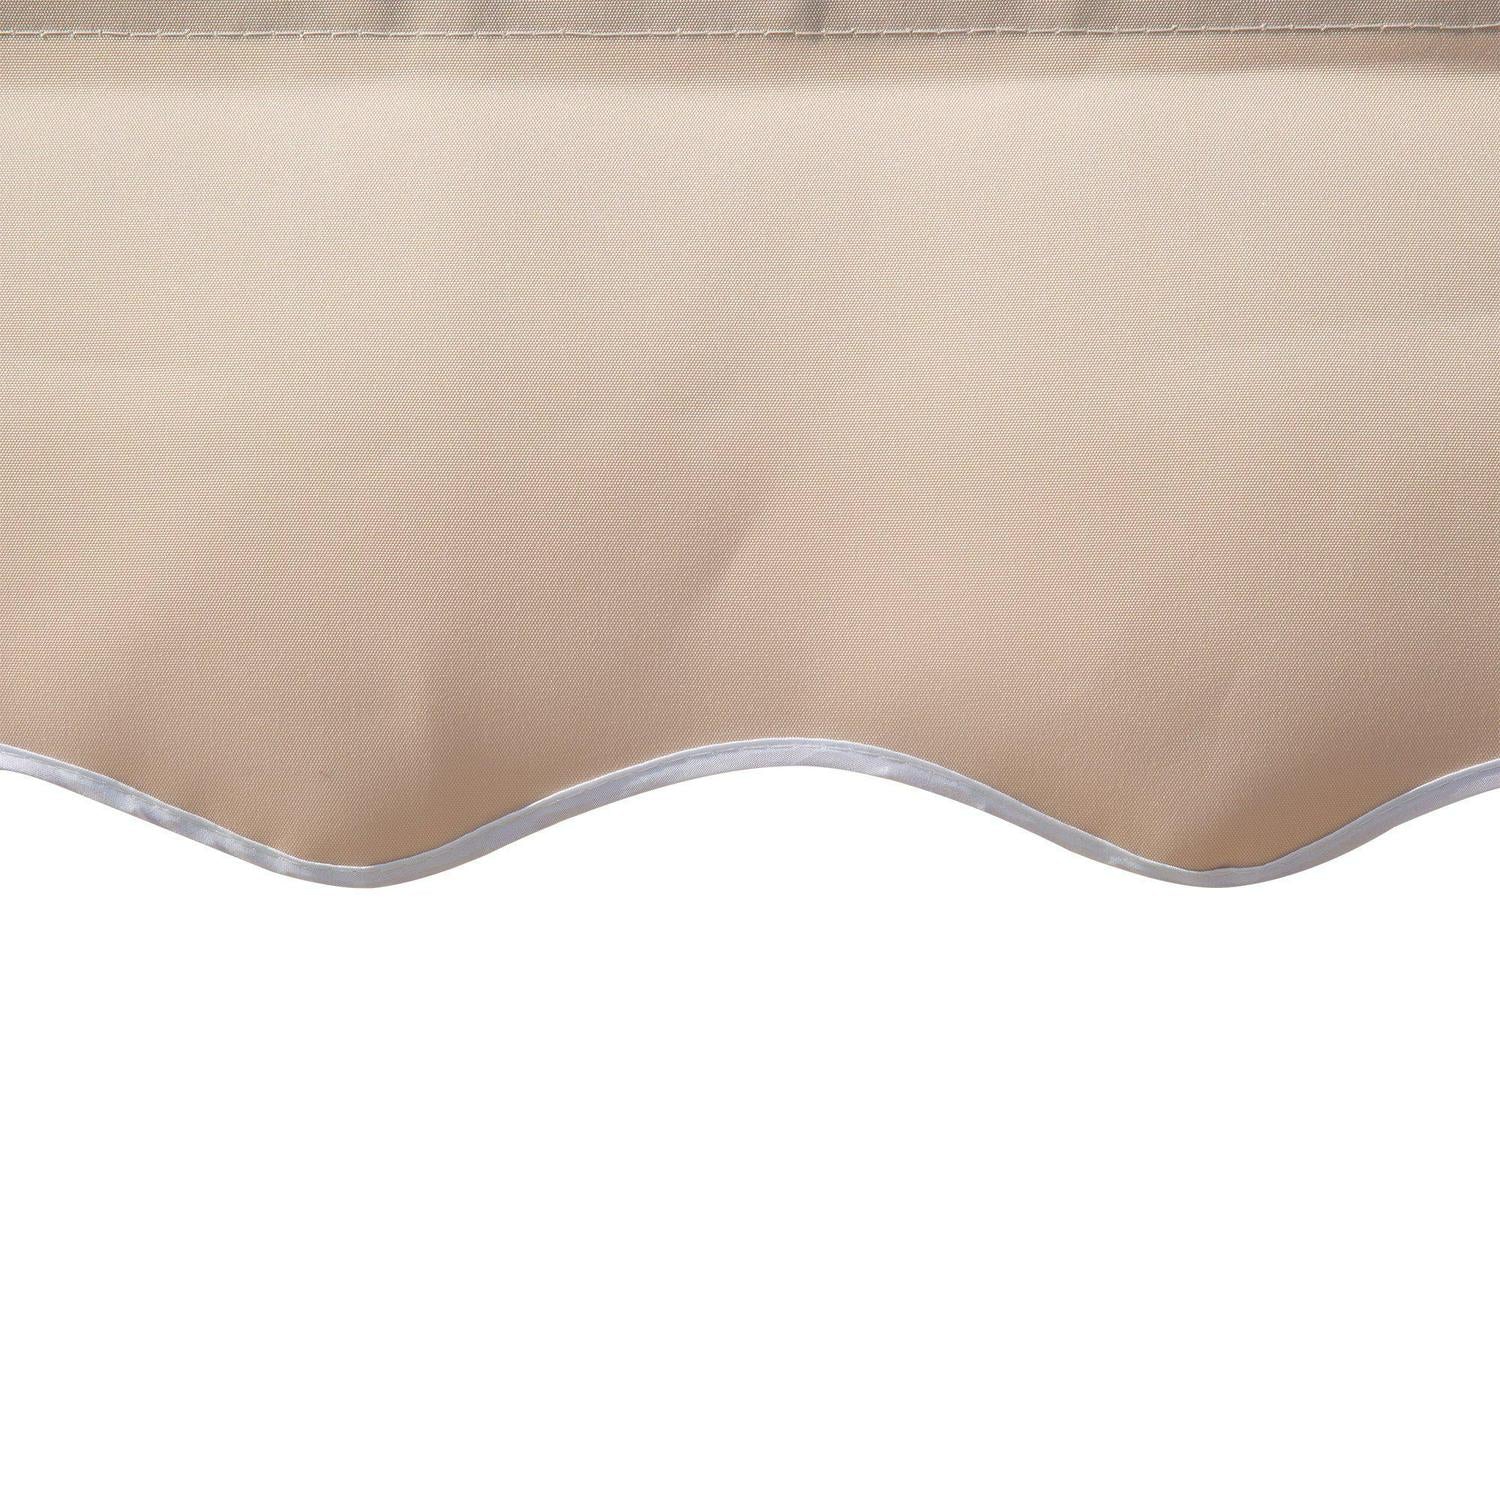 3 X 2m Manual Retractable Awning - Beige